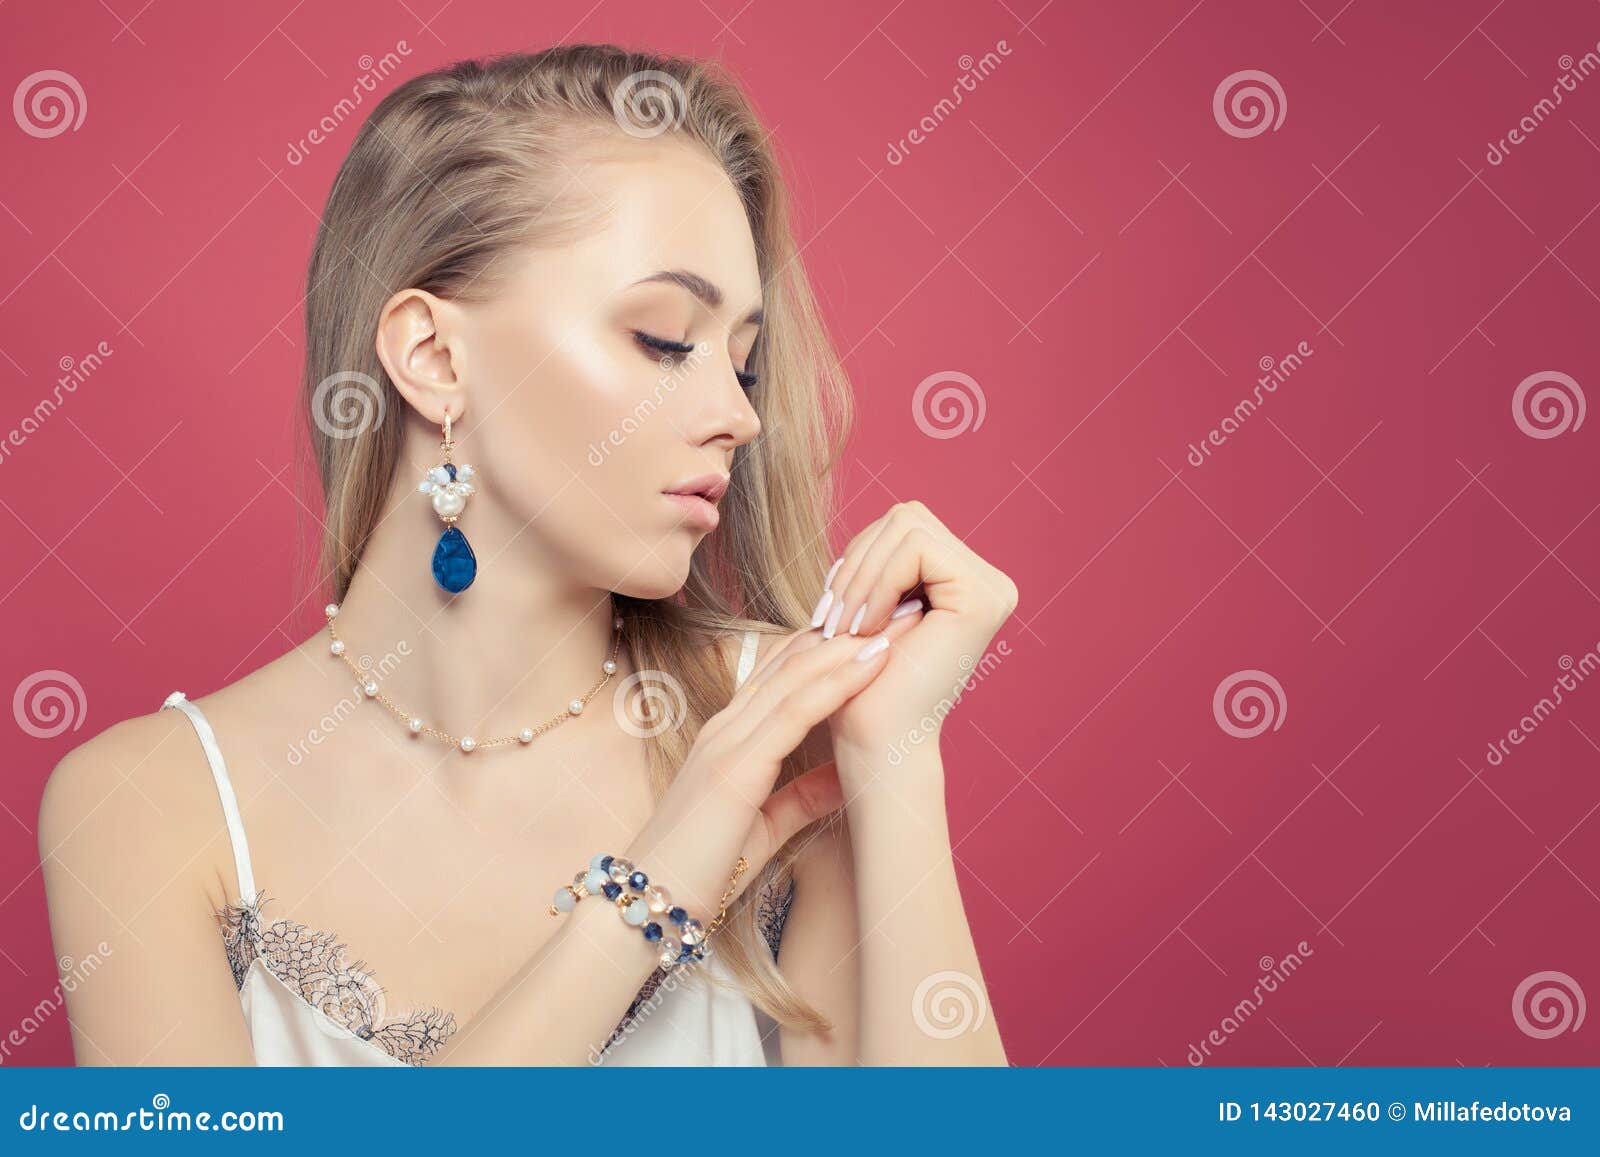 408,113 Beautiful Girl Jewelry Royalty-Free Images, Stock Photos